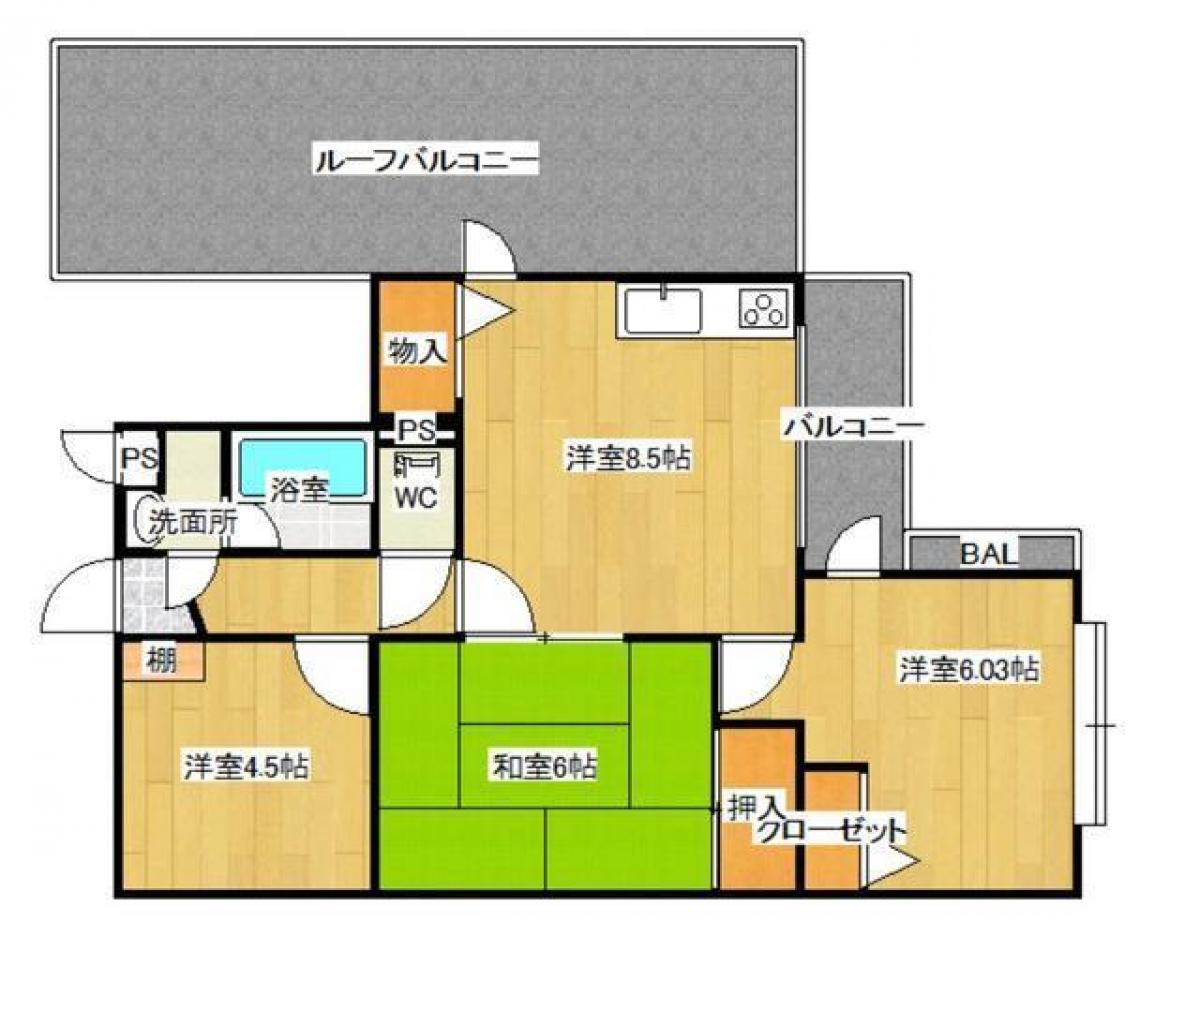 Picture of Apartment For Sale in Hamura Shi, Tokyo, Japan